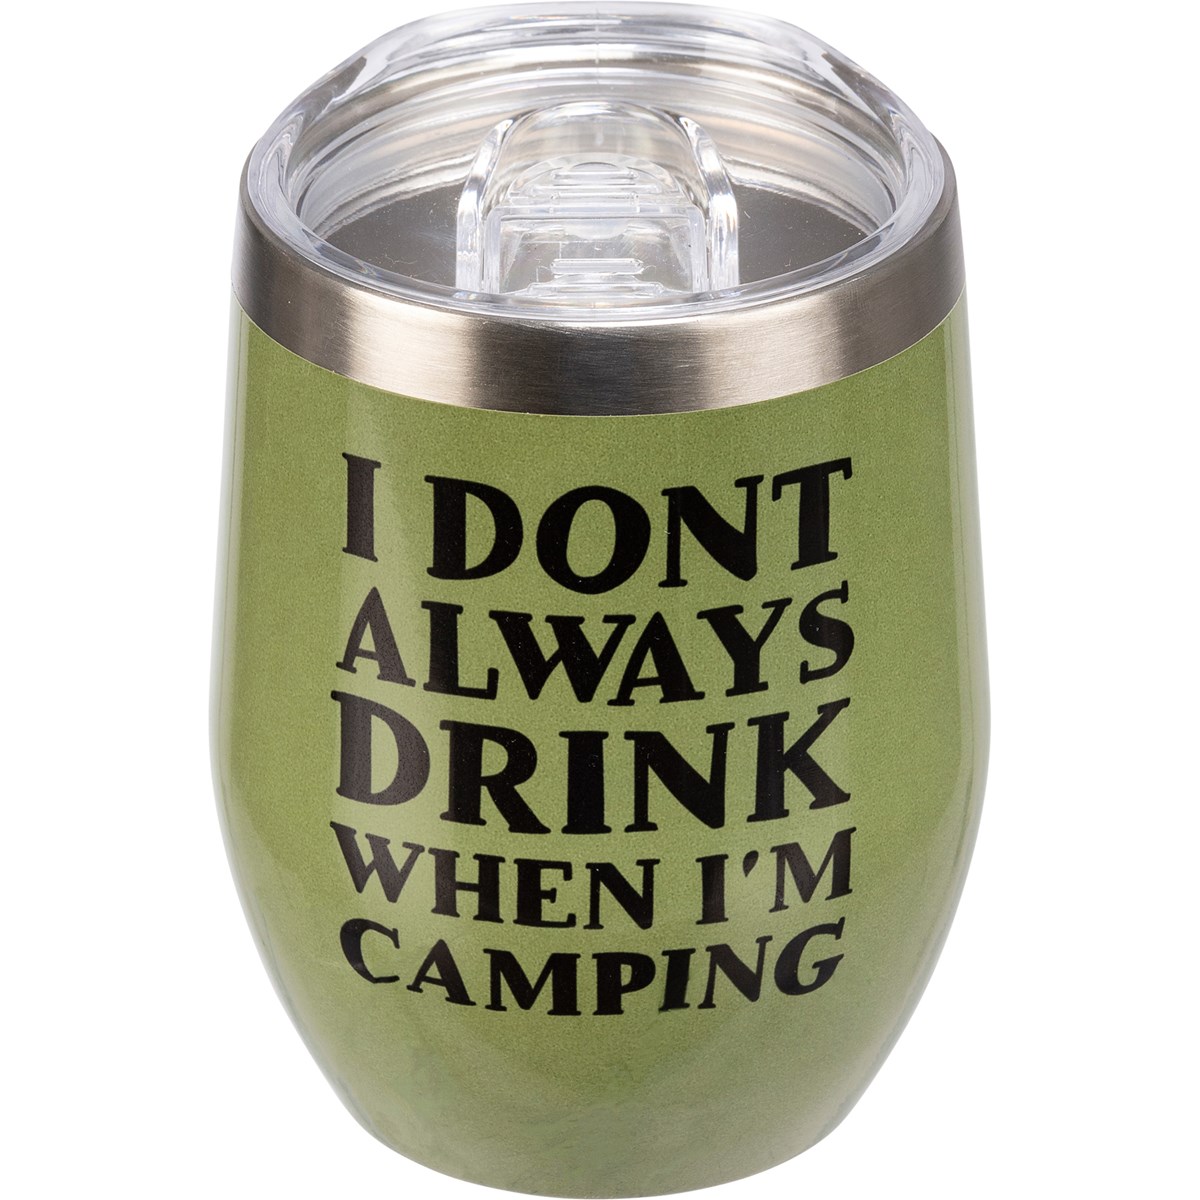 Drink When Camping Yes I Do Wine Tumbler - Stainless Steel, Plastic